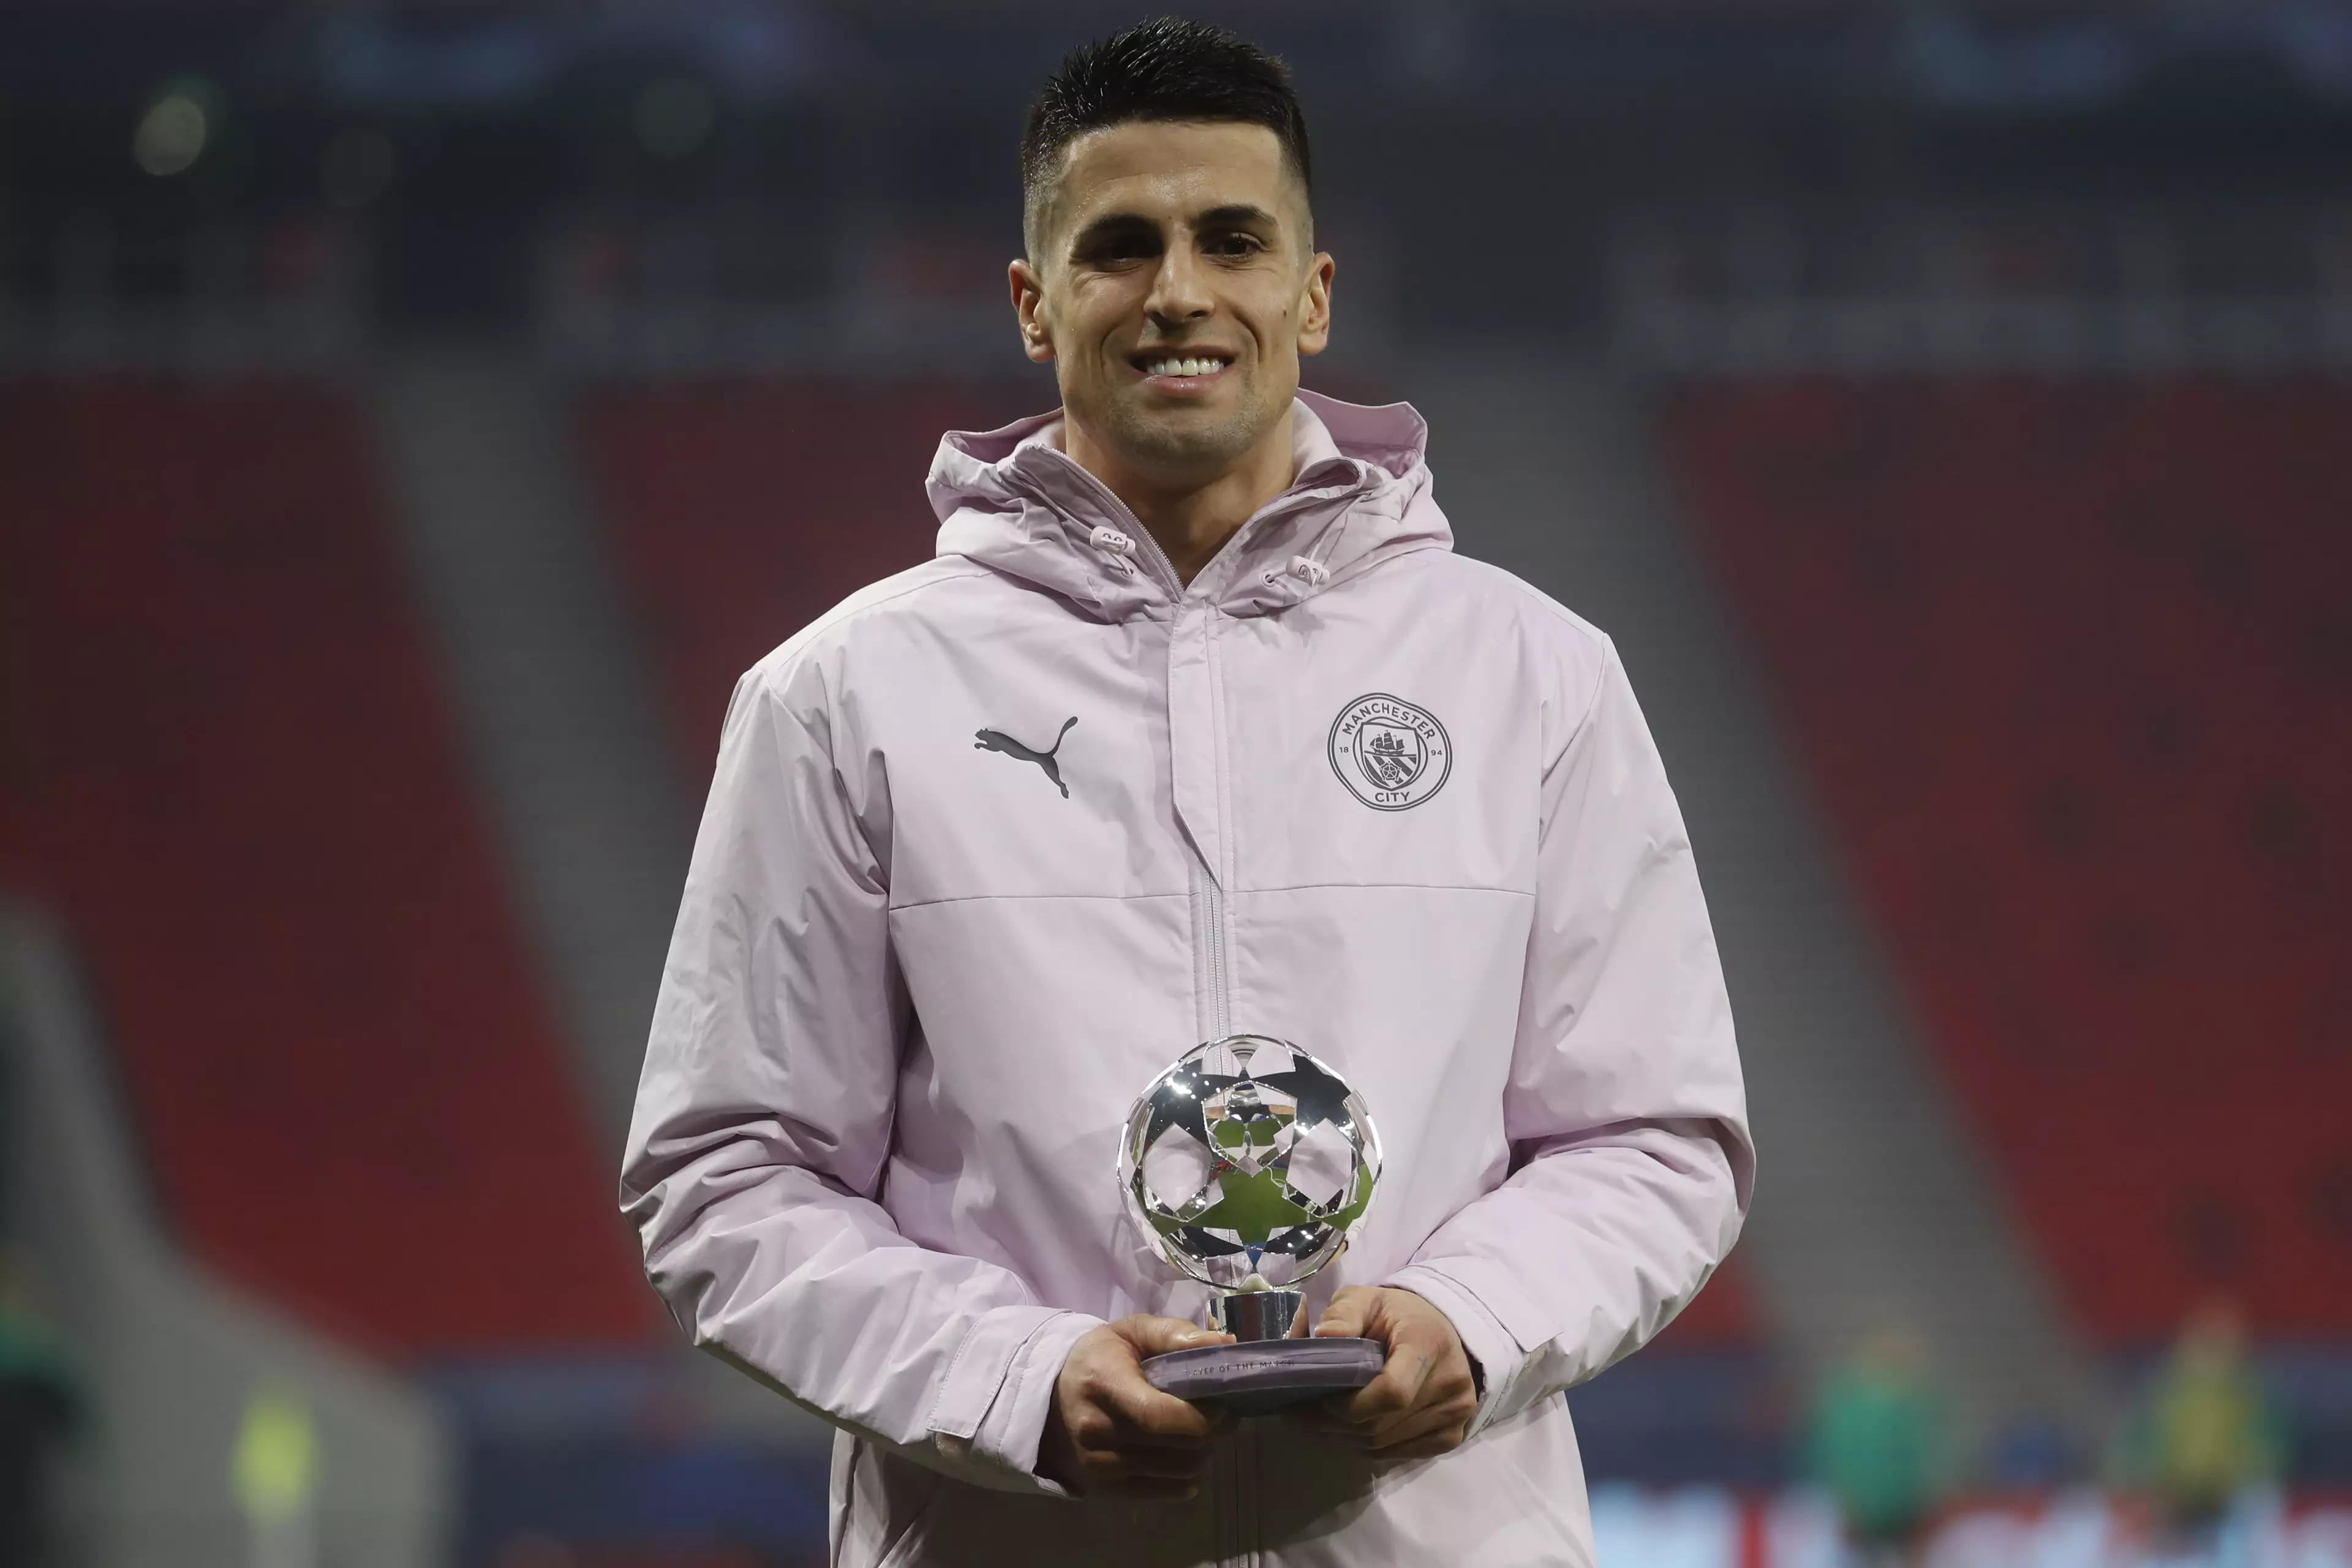 Cancelo won the man of the match award in the Champions League recently. Image: PA Images